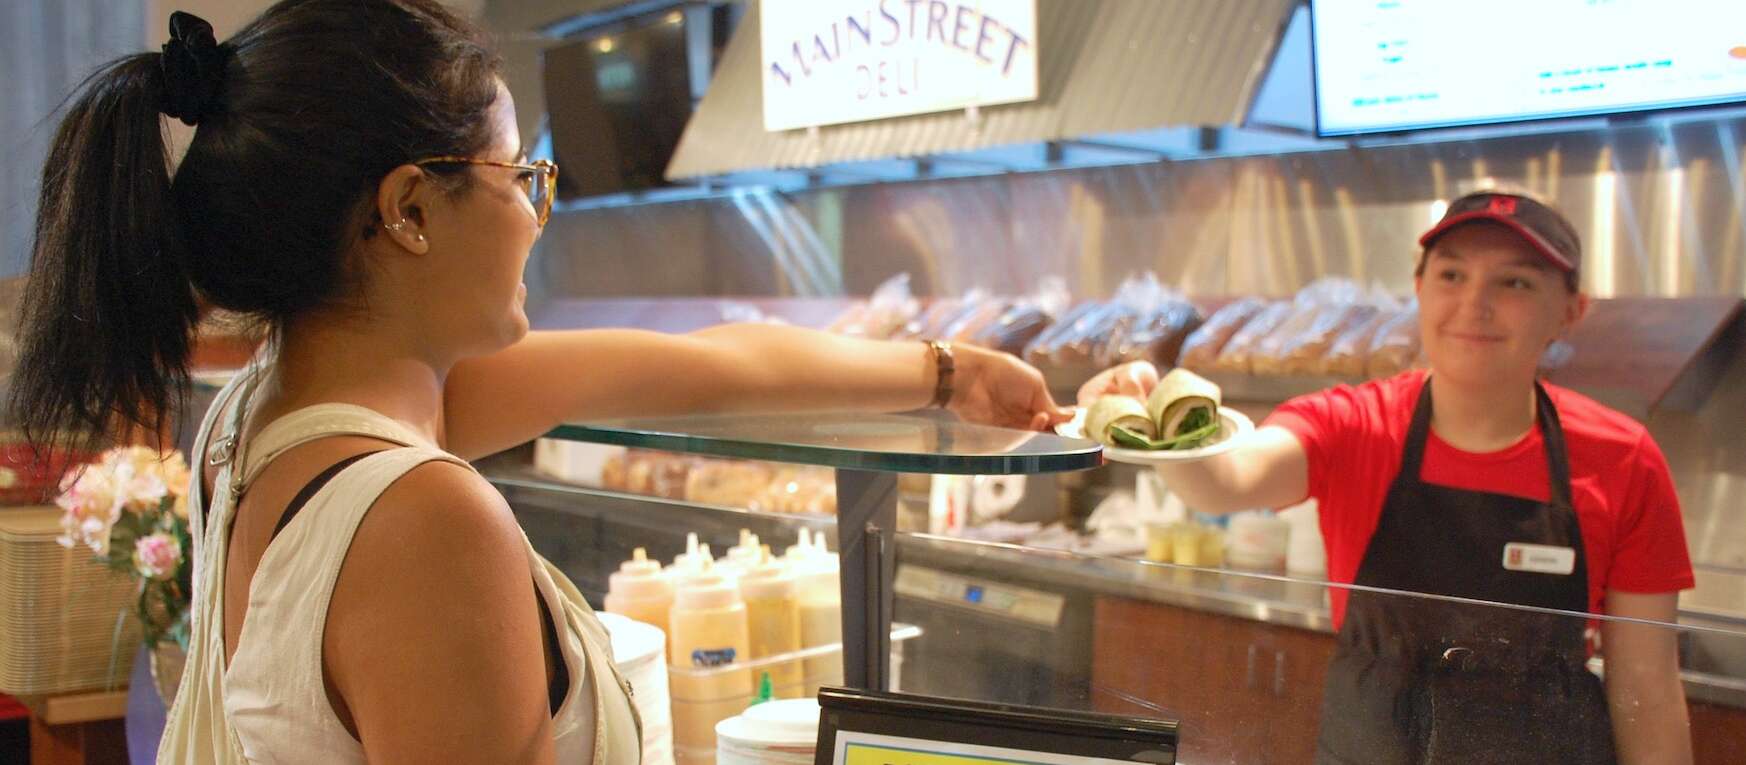 A woman at a sandwich bar takes a wrap from an employee